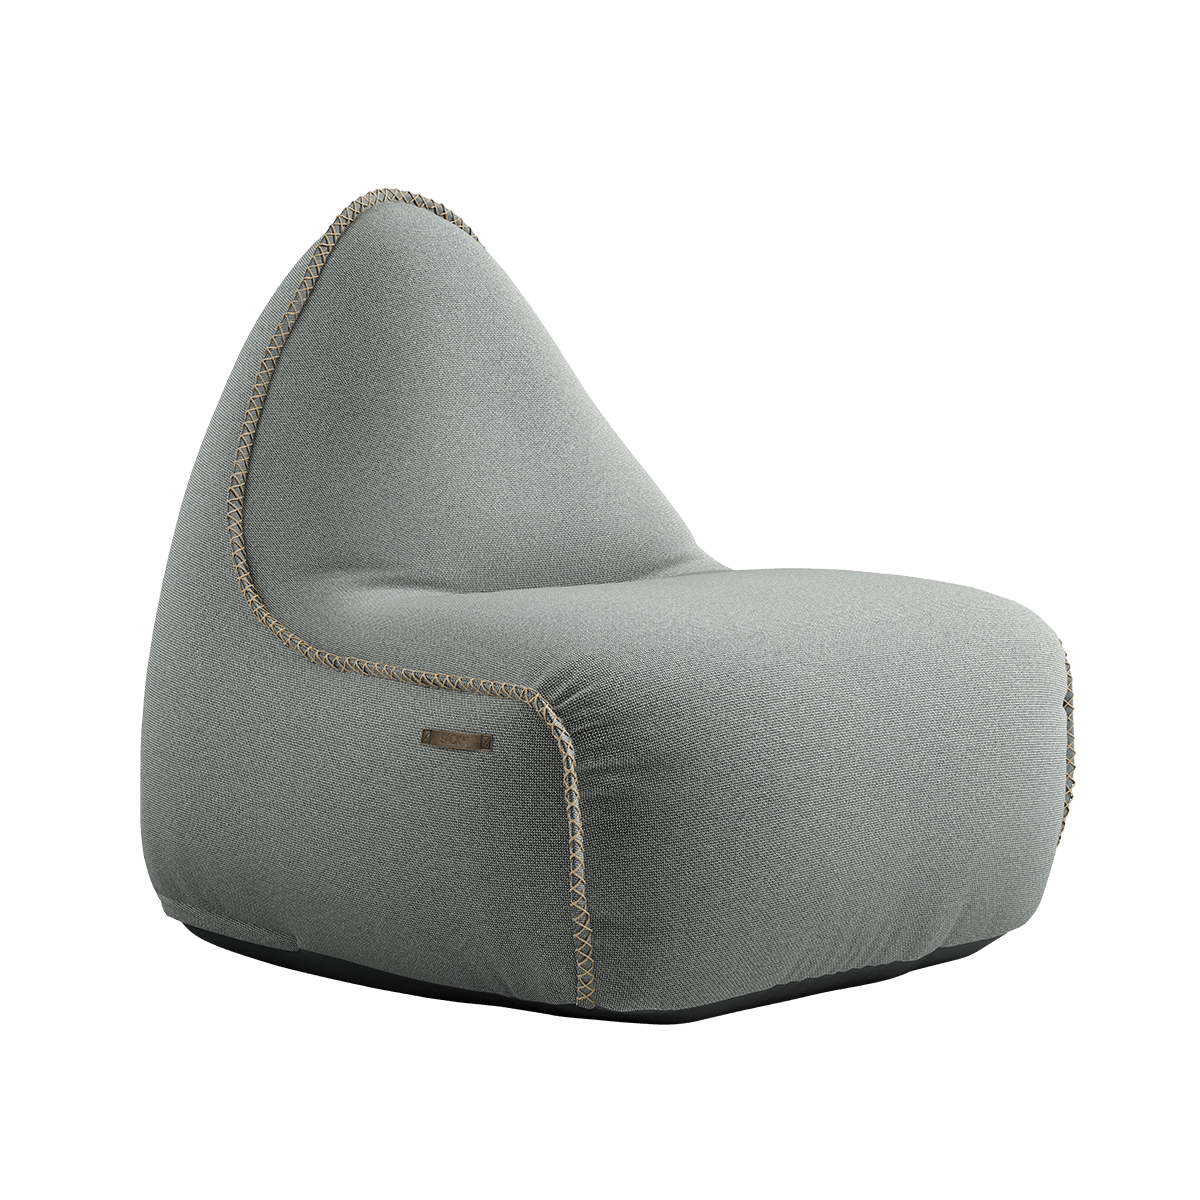 variant_8567104% | Cura Lounge Chair [Contract] - Cura Grey | SACKit